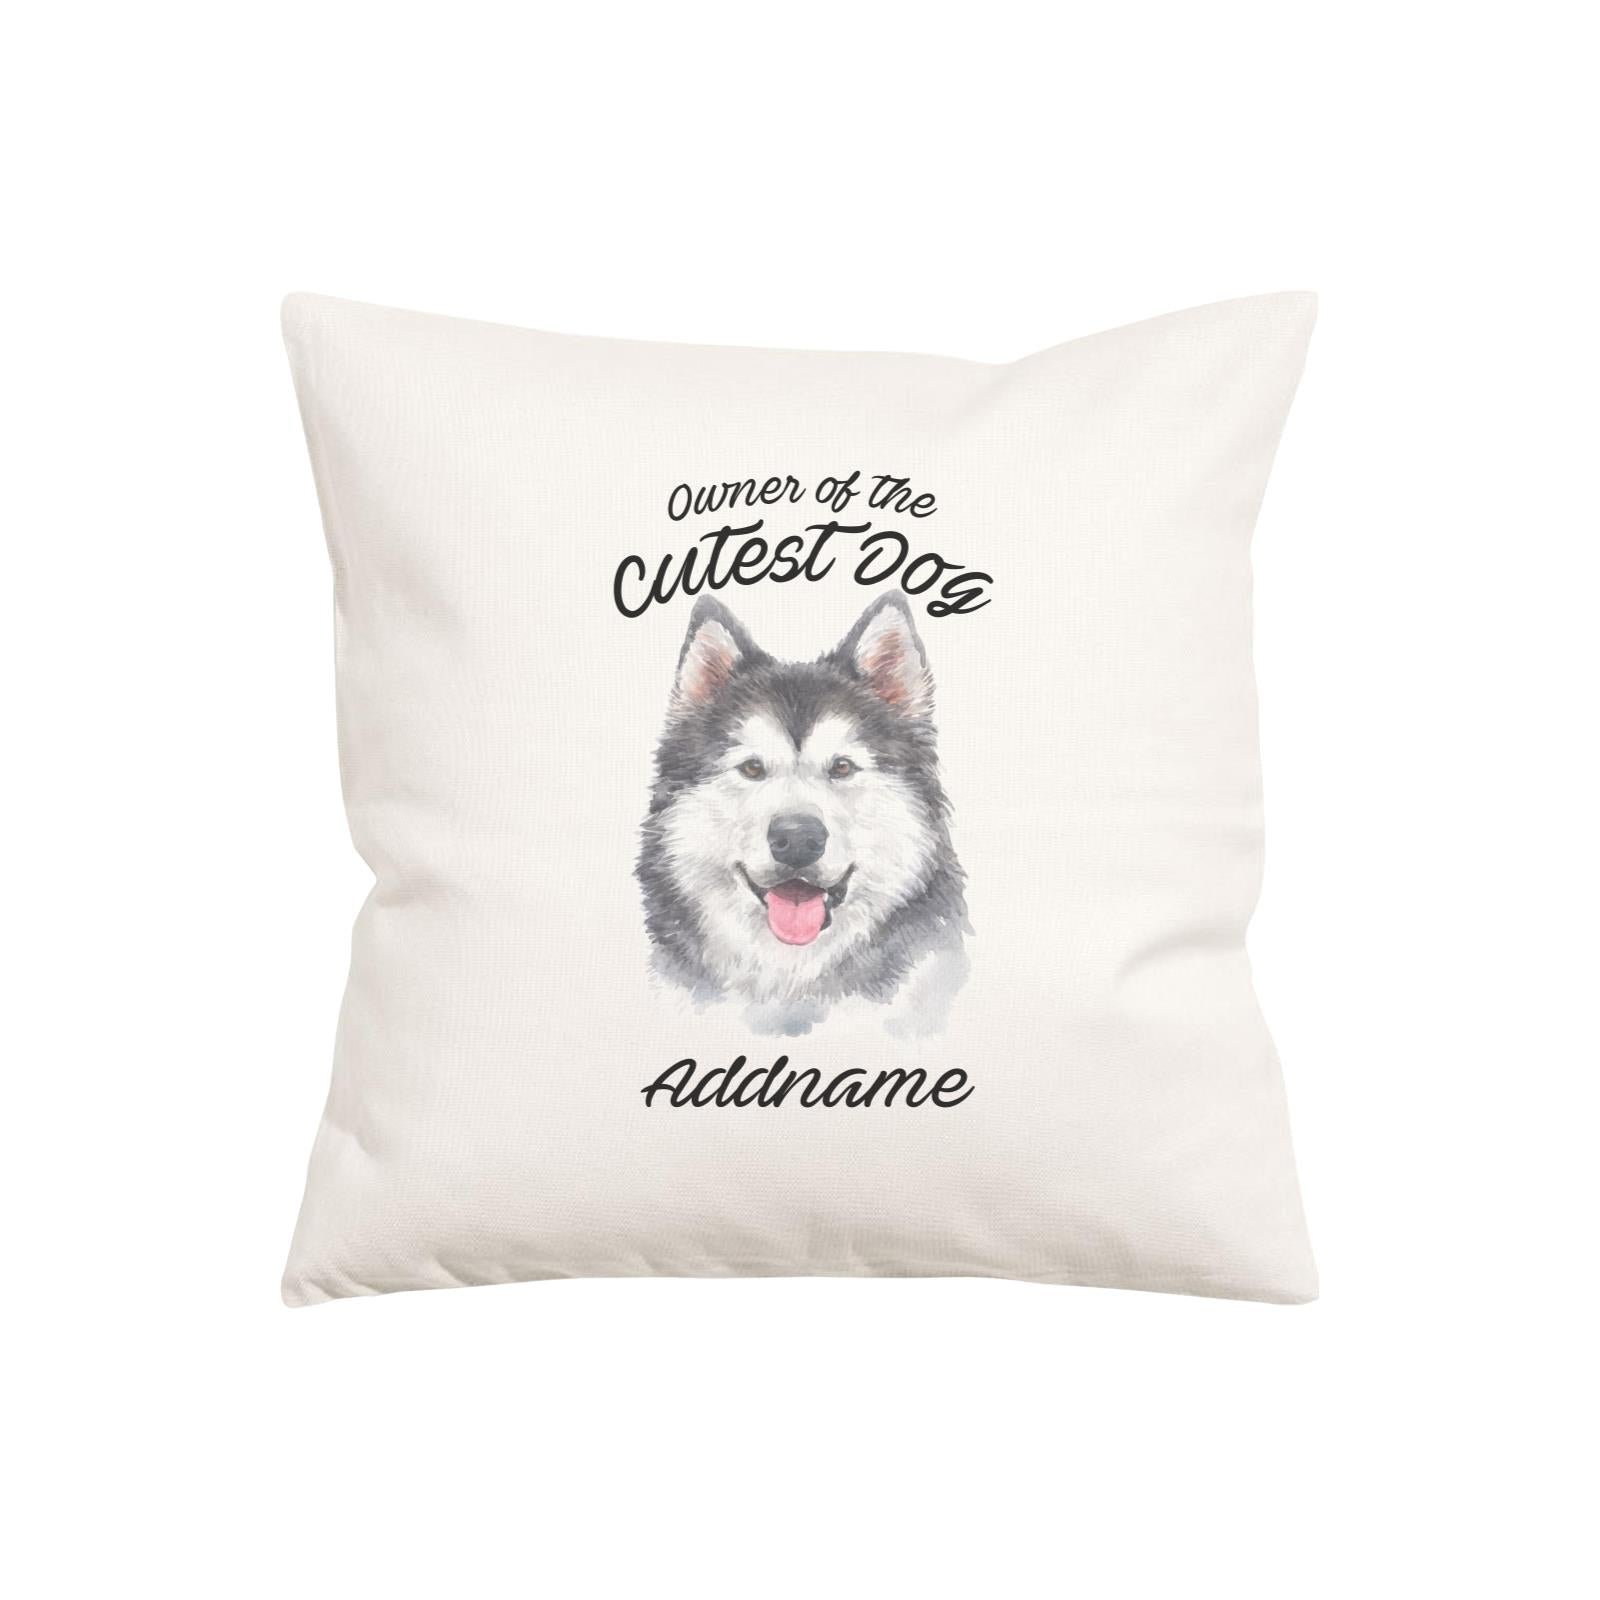 Watercolor Dog Owner Of The Cutest Dog Siberian Husky Smile Addname Pillow Cushion